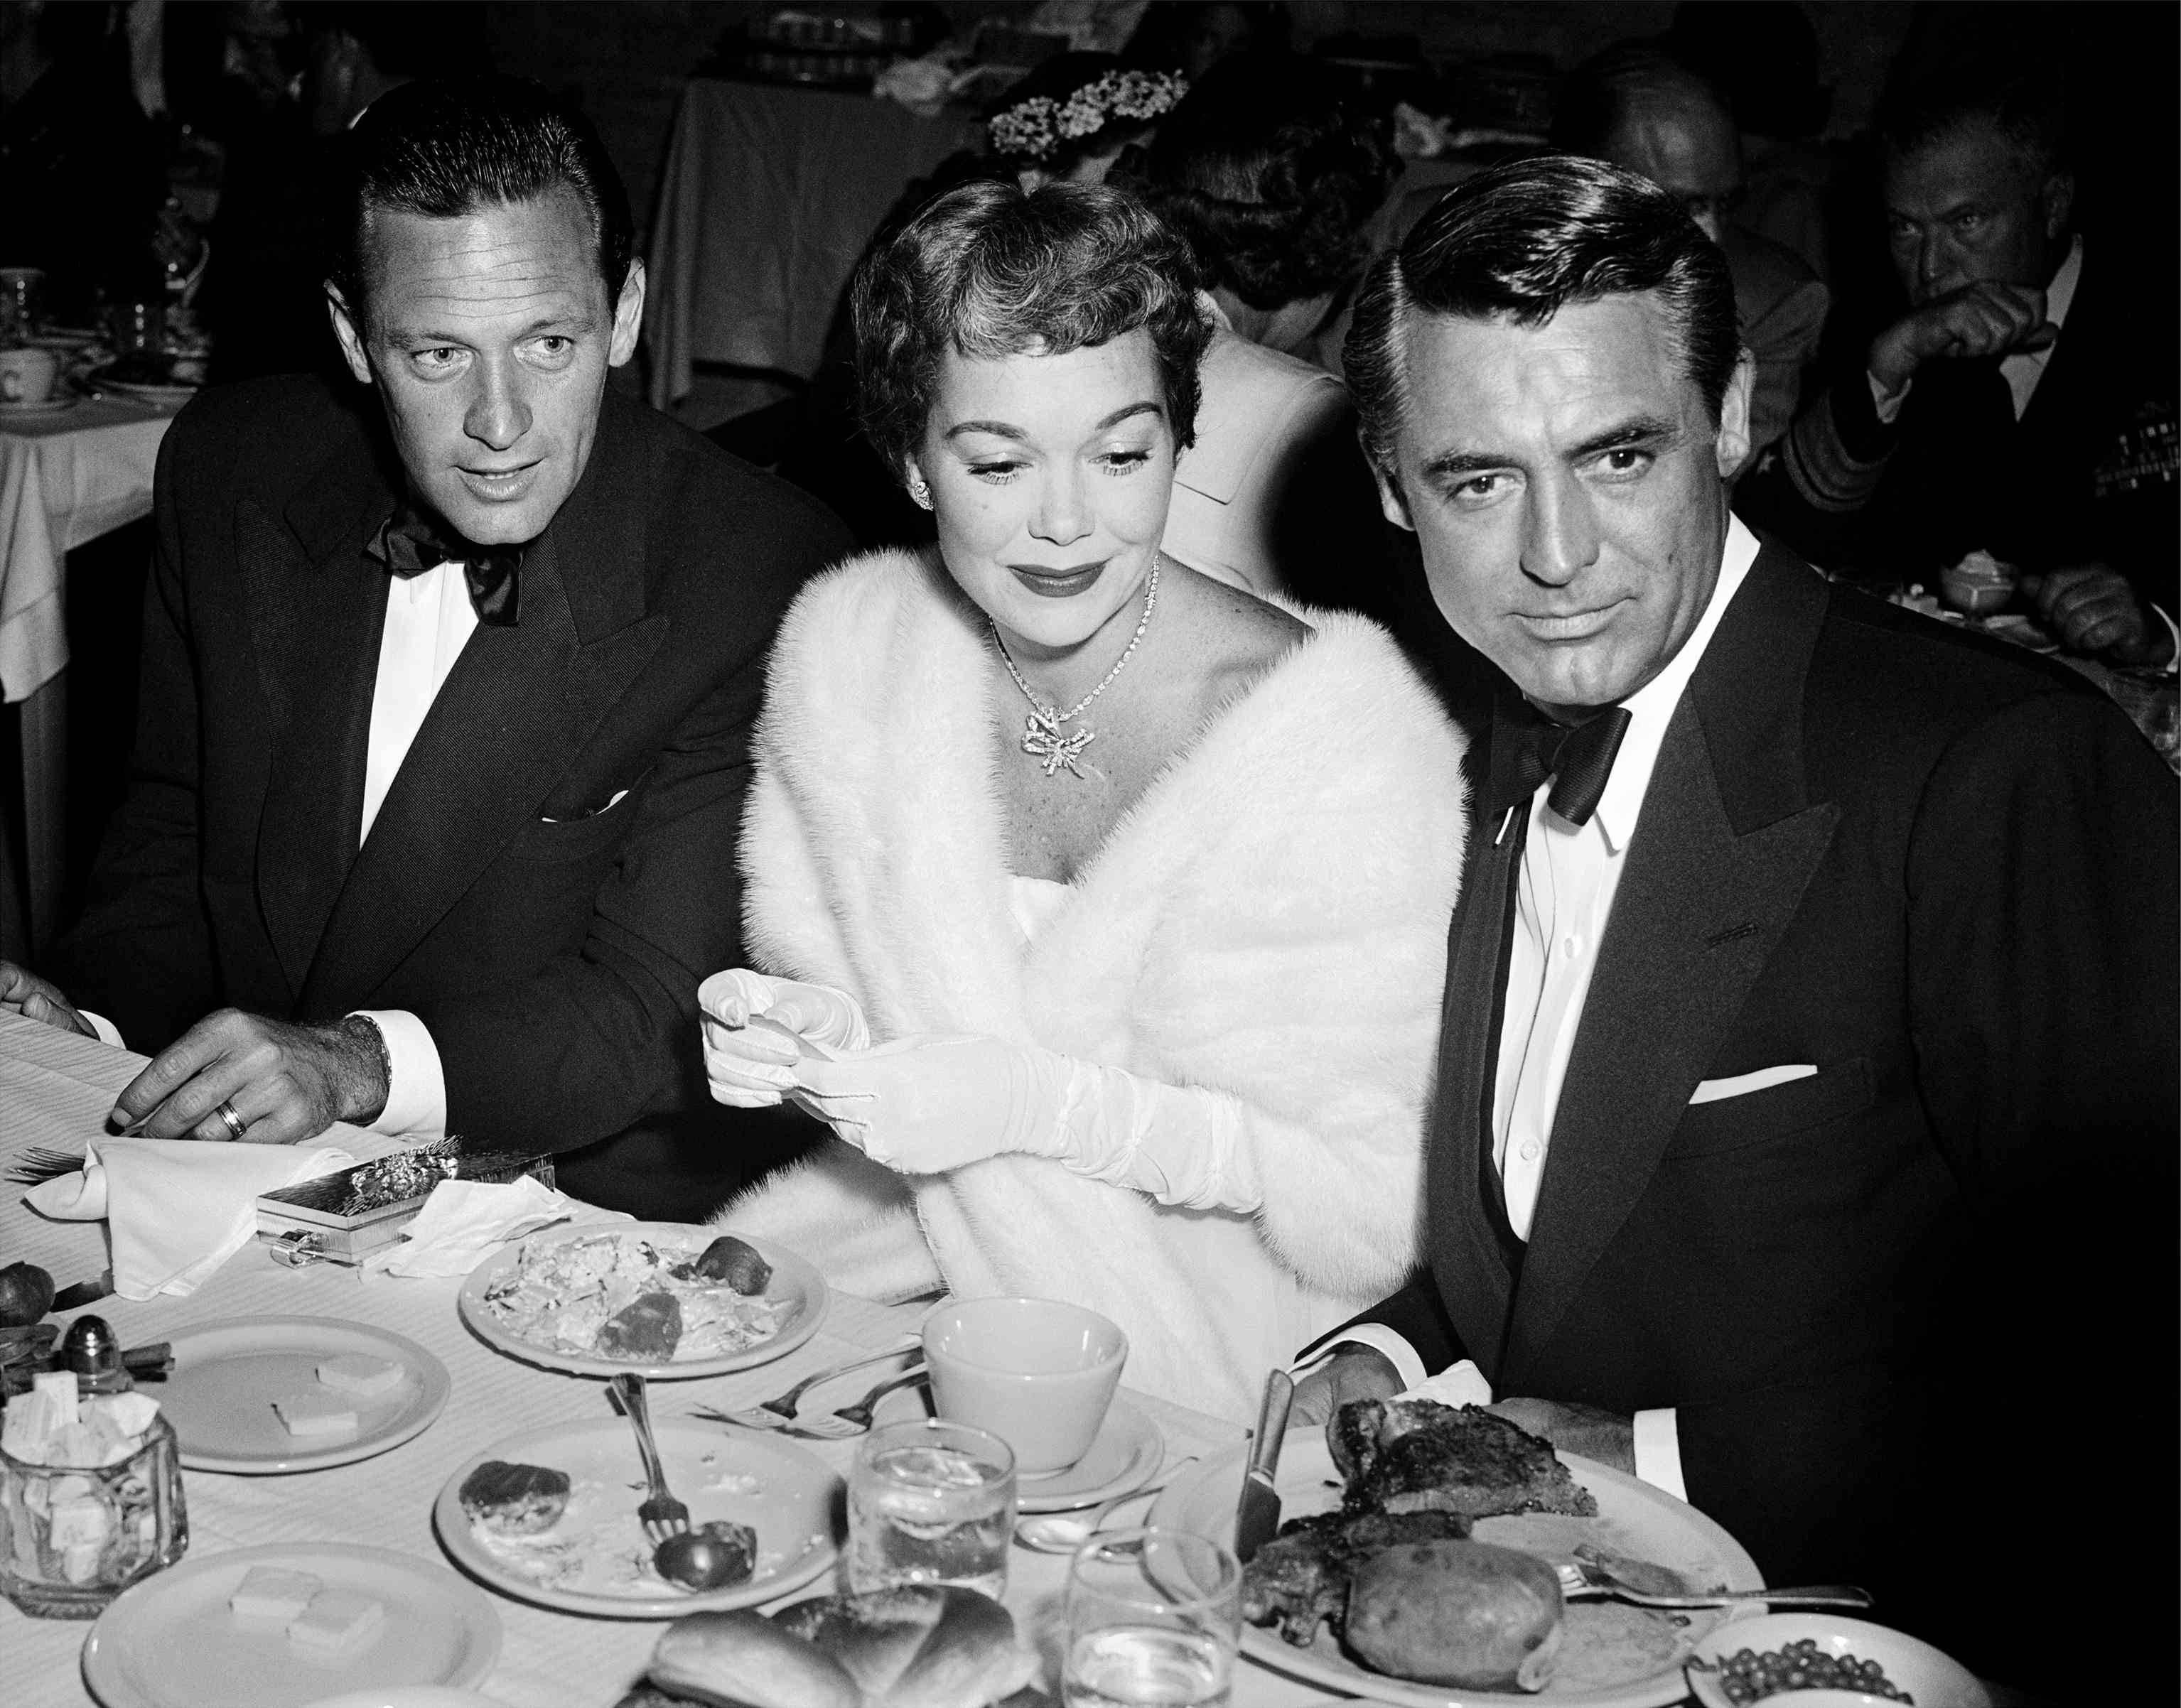 Frank Worth Black and White Photograph - Cary Grant, Jane Wyman, and William Holden Fine Art Print